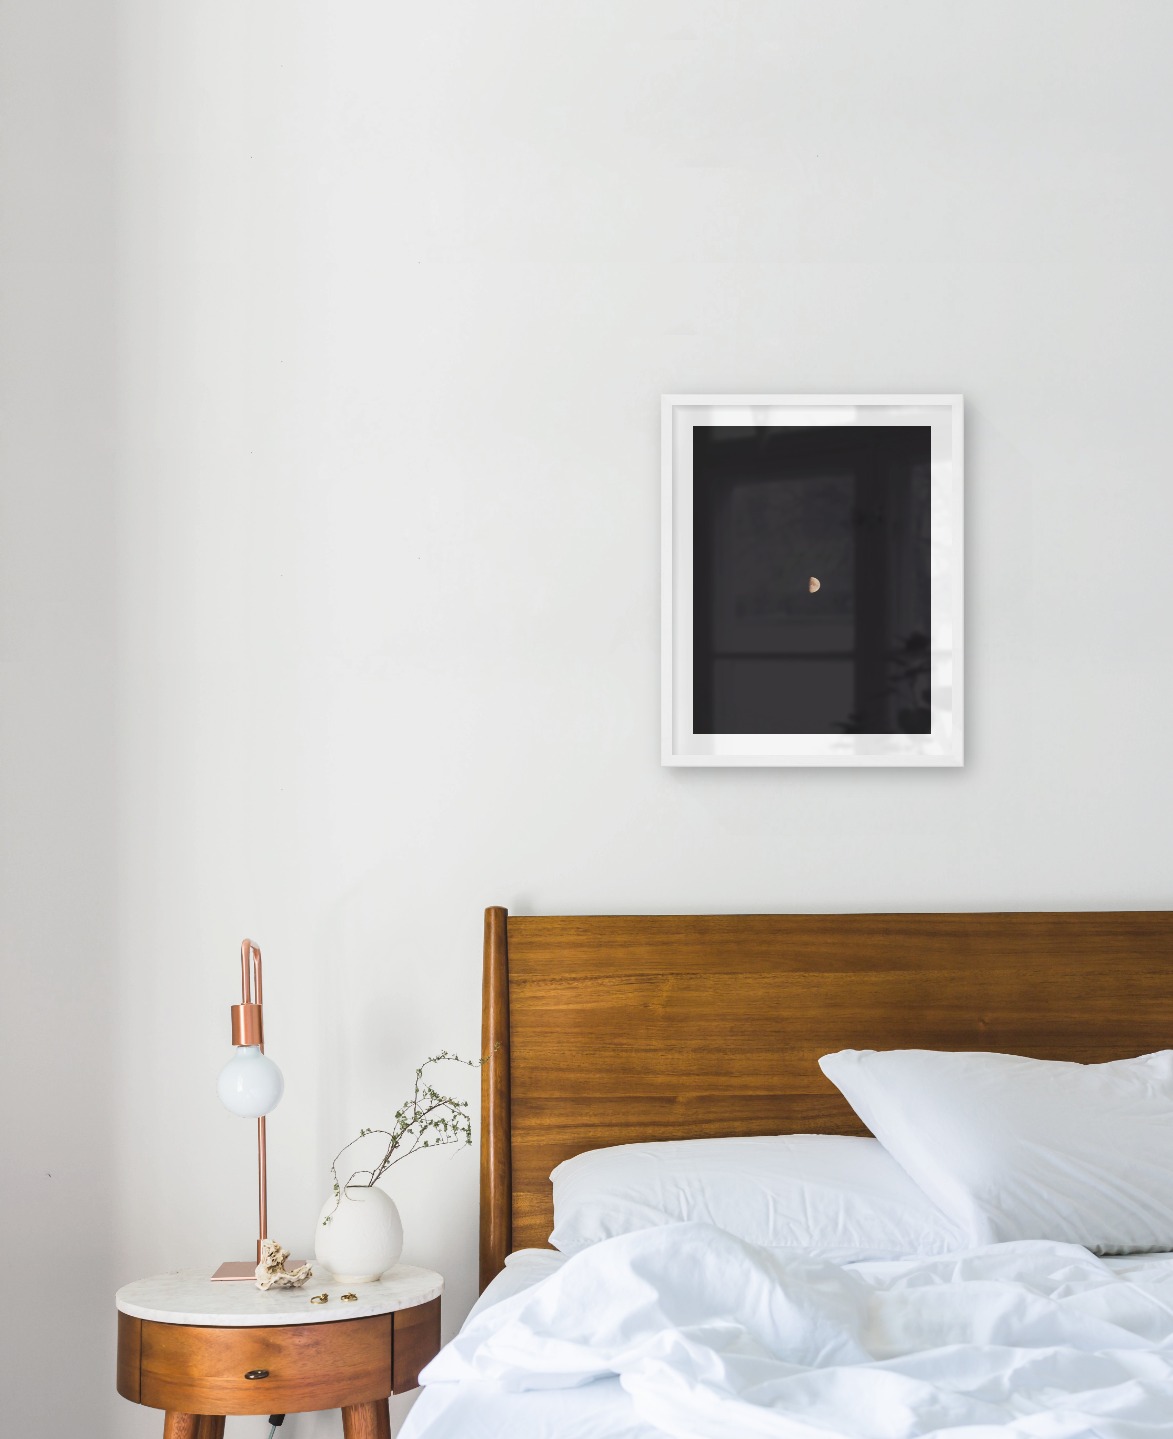 Gallery wall with picture frame in white in size 40x50 with print "The moon"